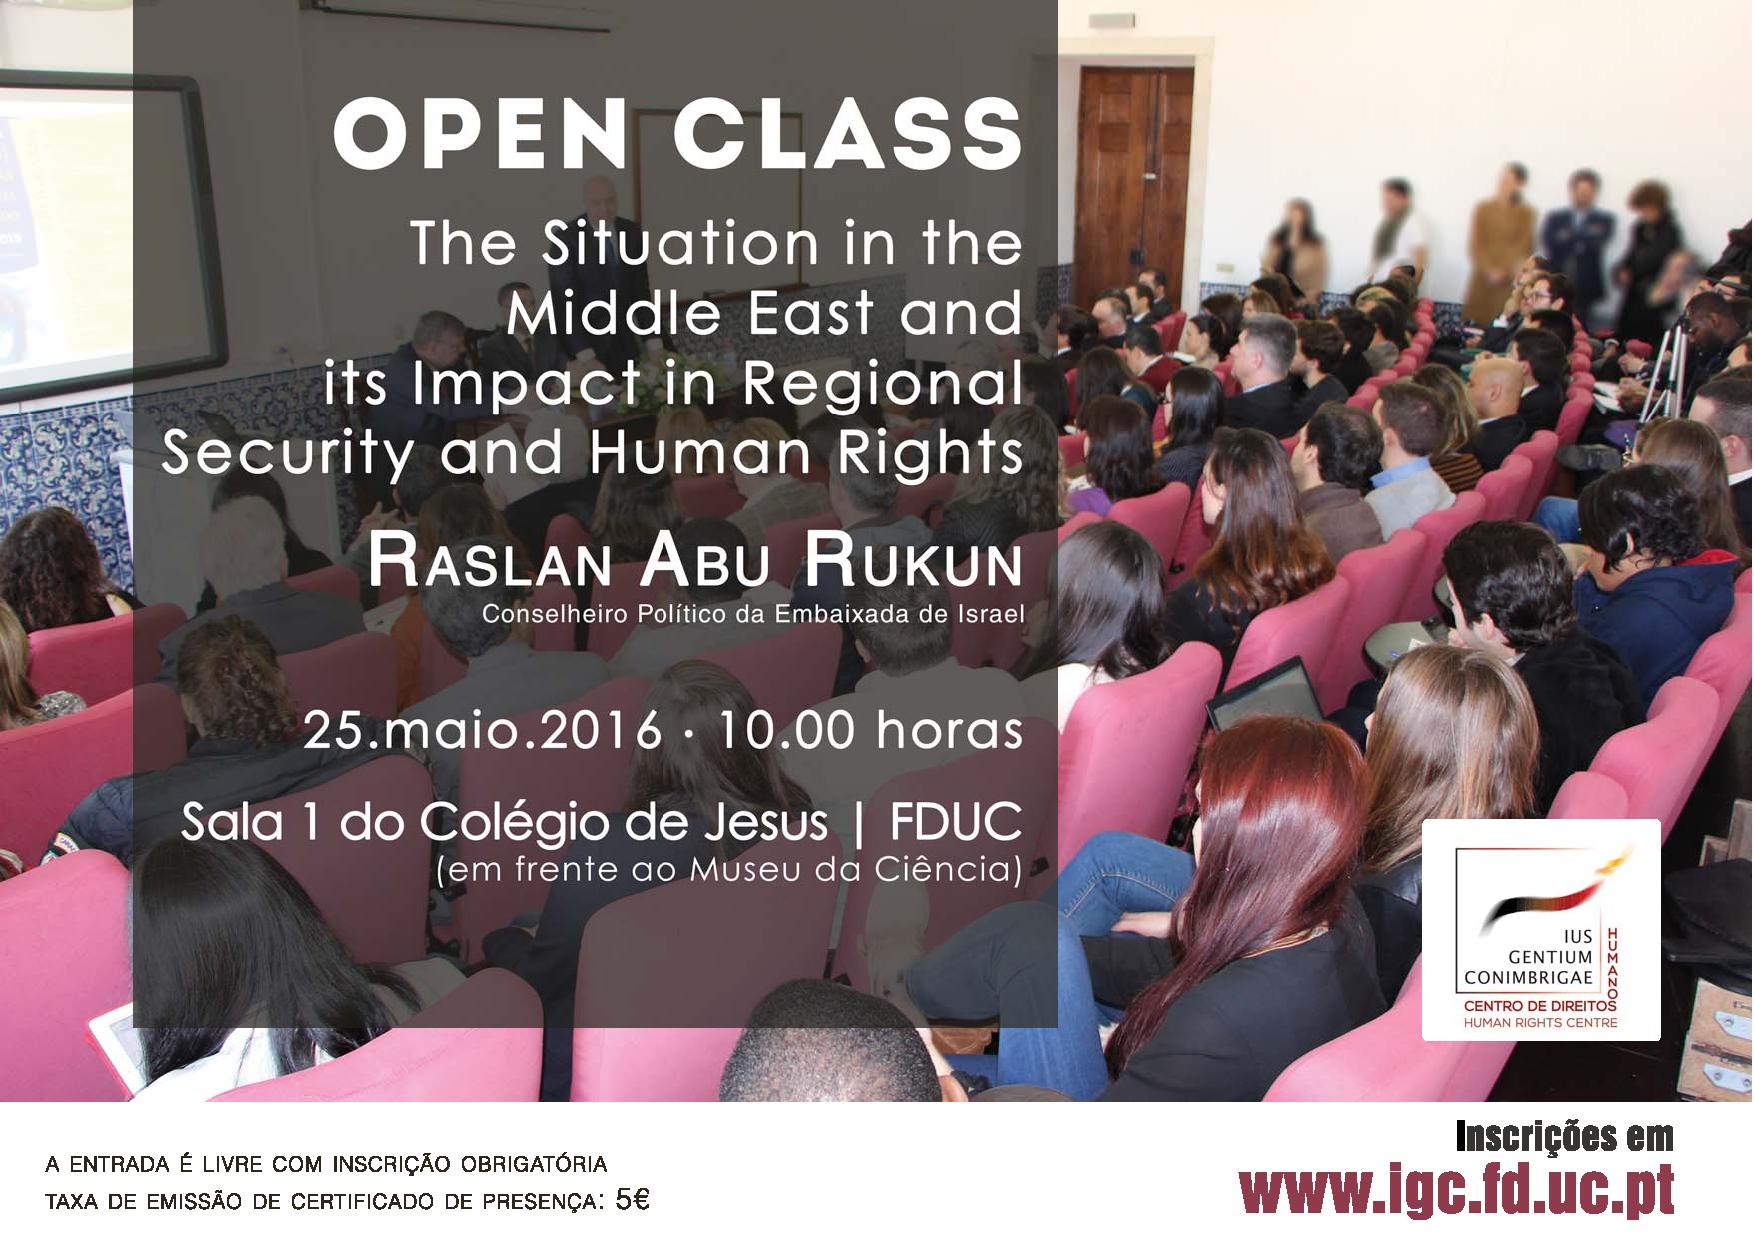 Open Class The Situation in the Middle East and its Impact in Regional Security and Human Rights